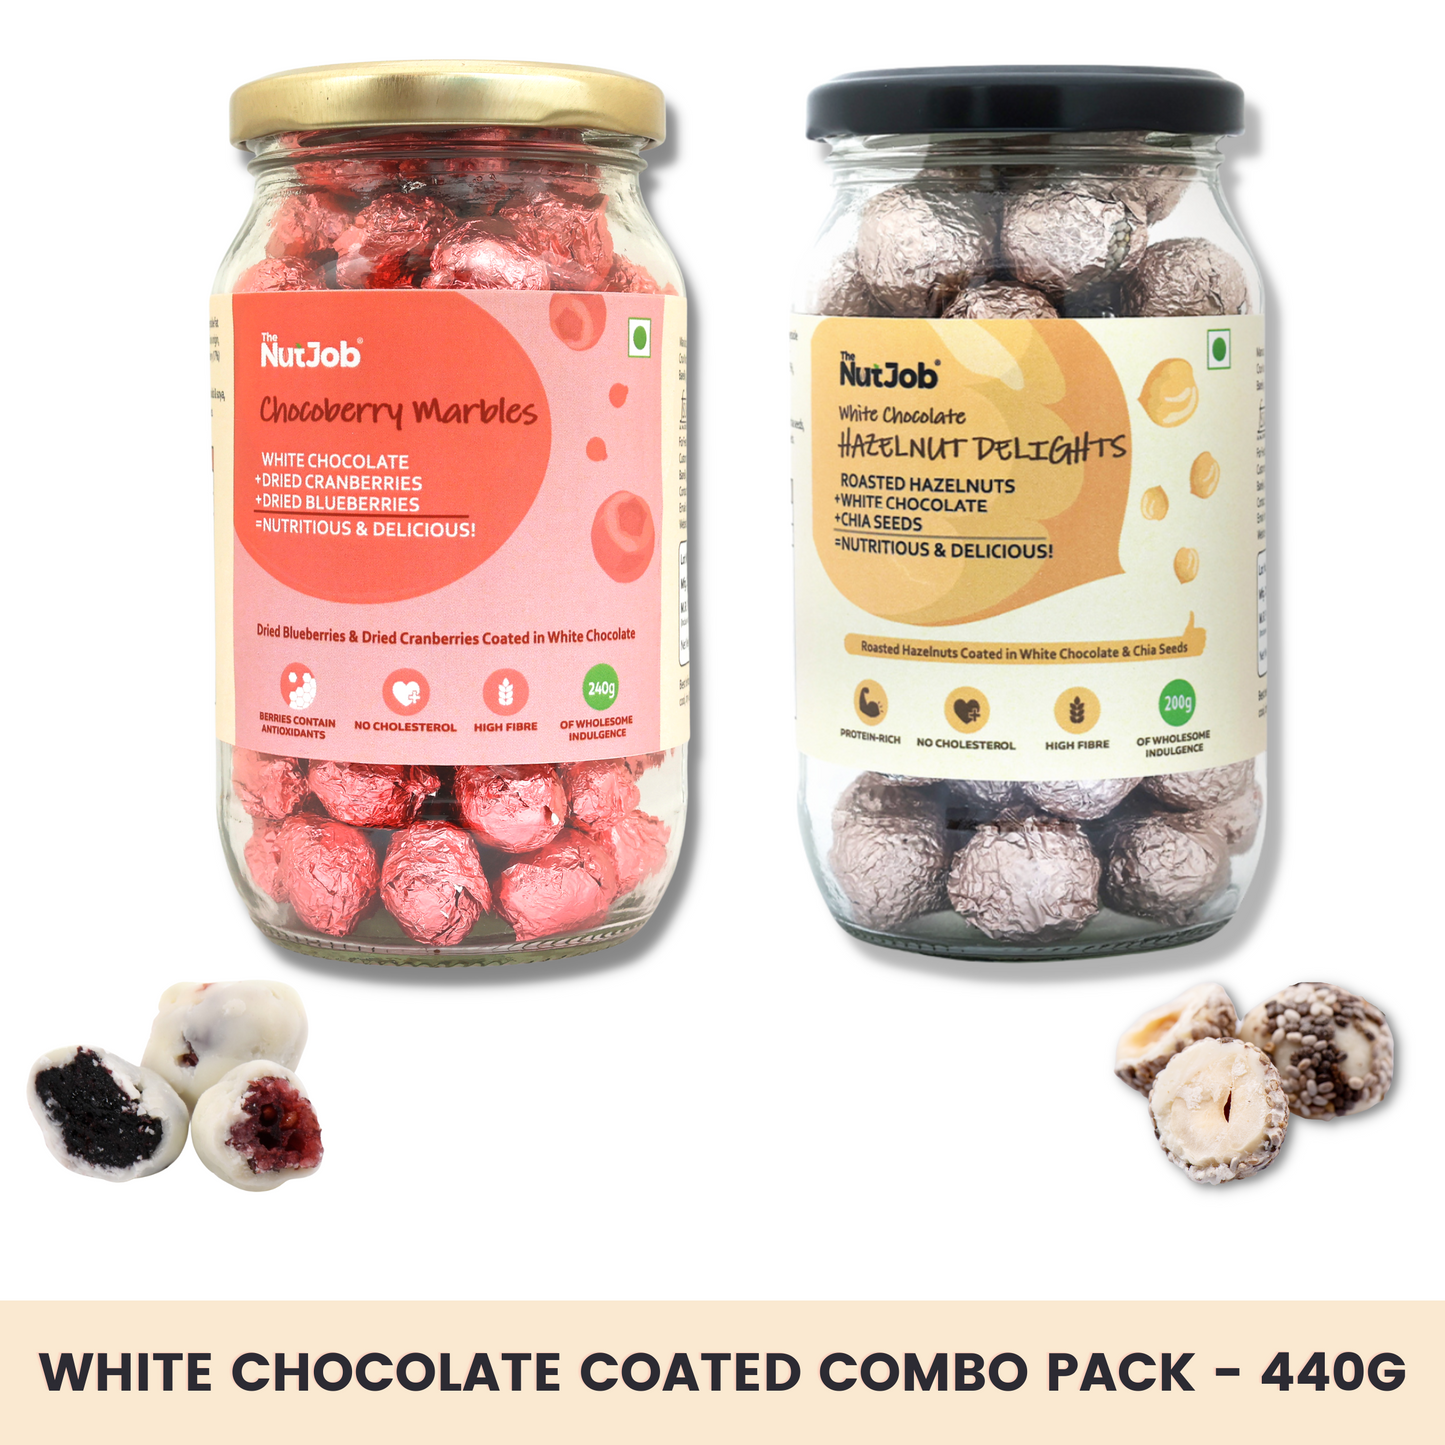 Combo Pack (440g) - Chocoberry Marbles(240g) and White Chocolate Hazelnut Delights(200g)